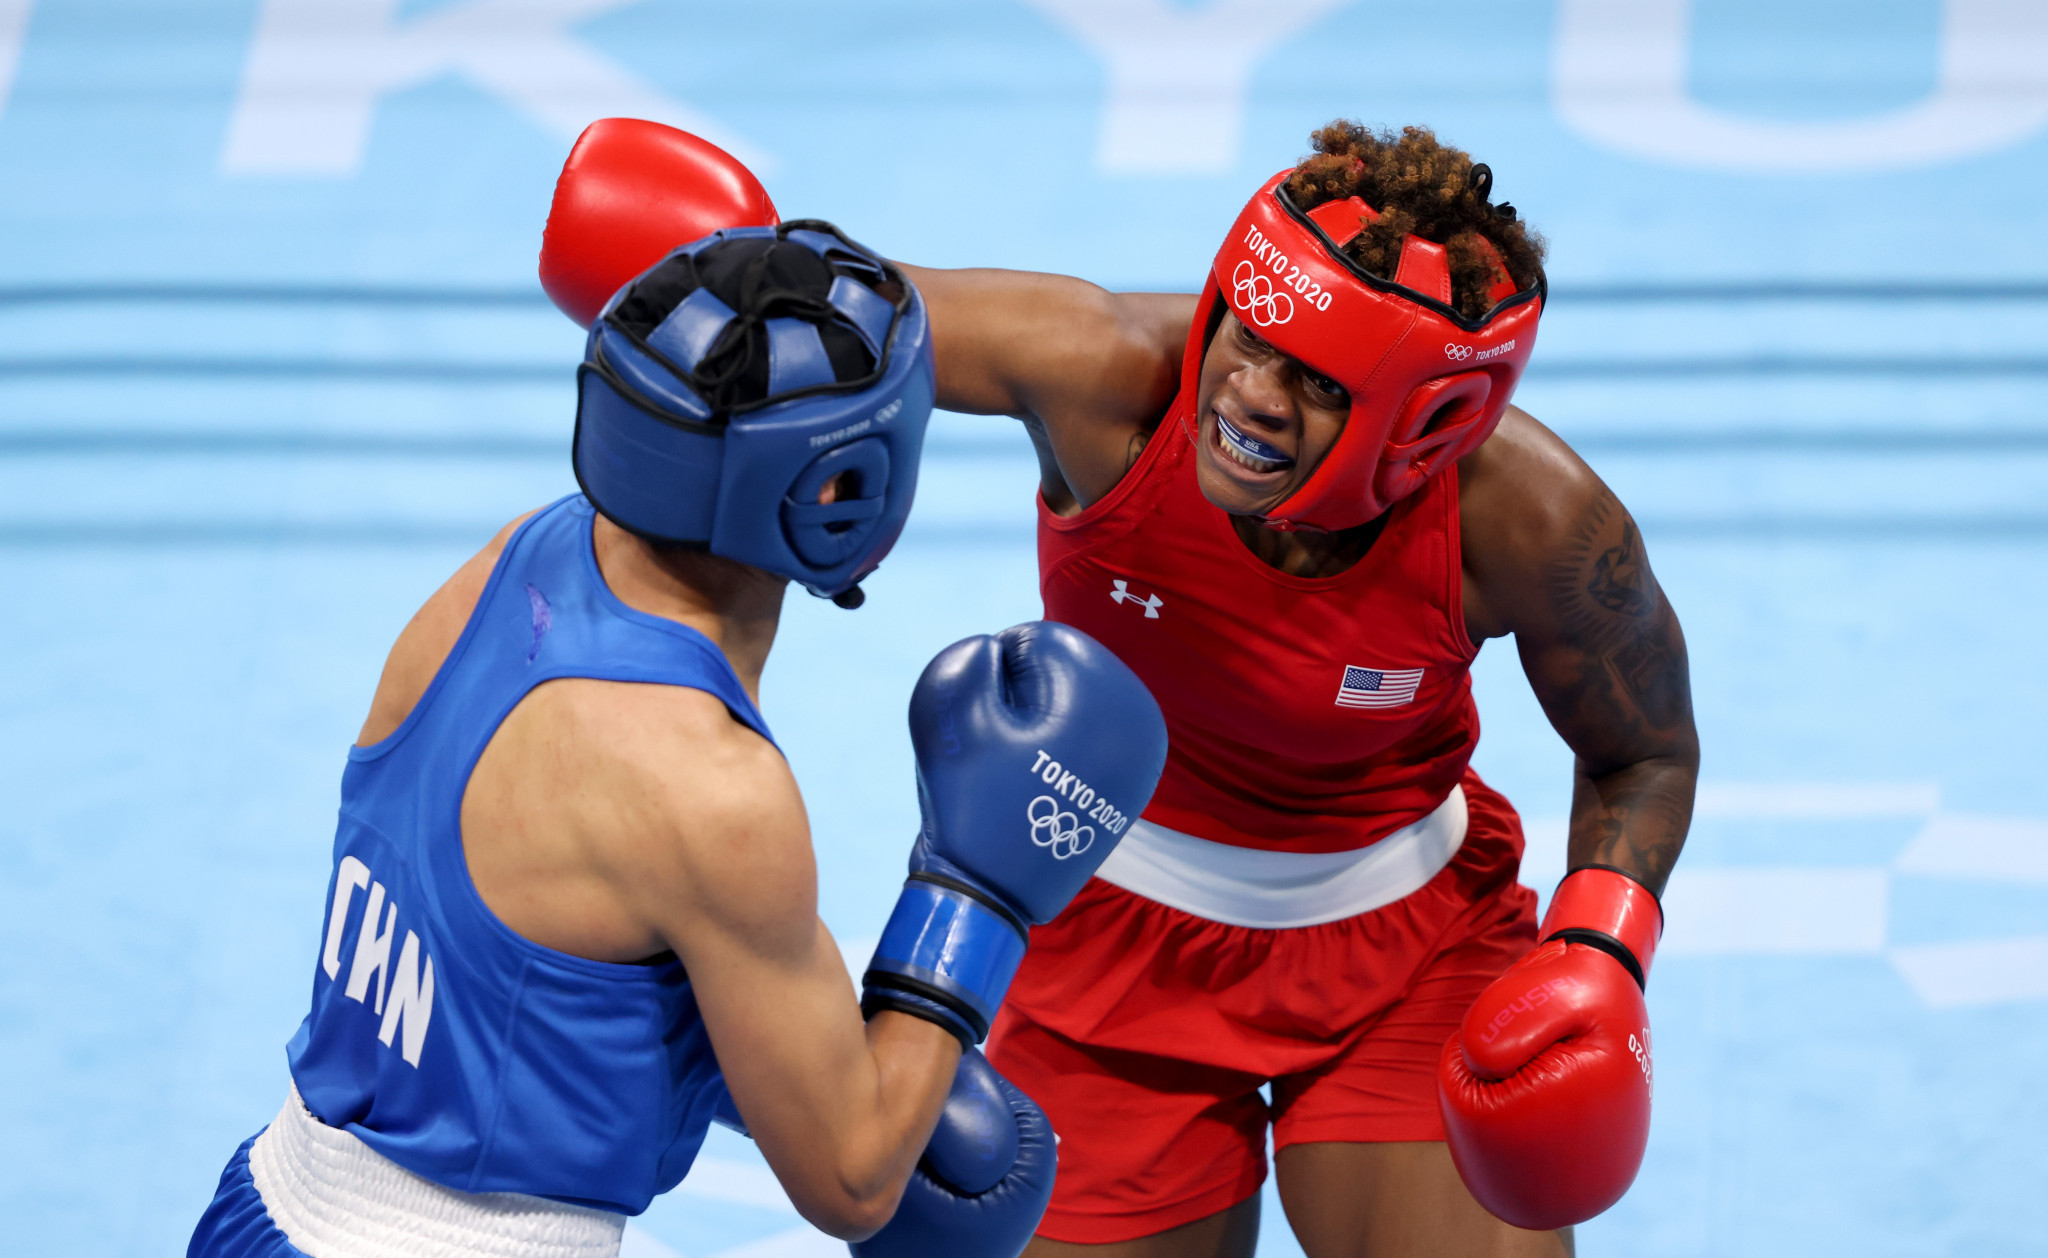 USA Boxing was the first national governing body to announce a boycott of the Women's World Championships ©Getty Images